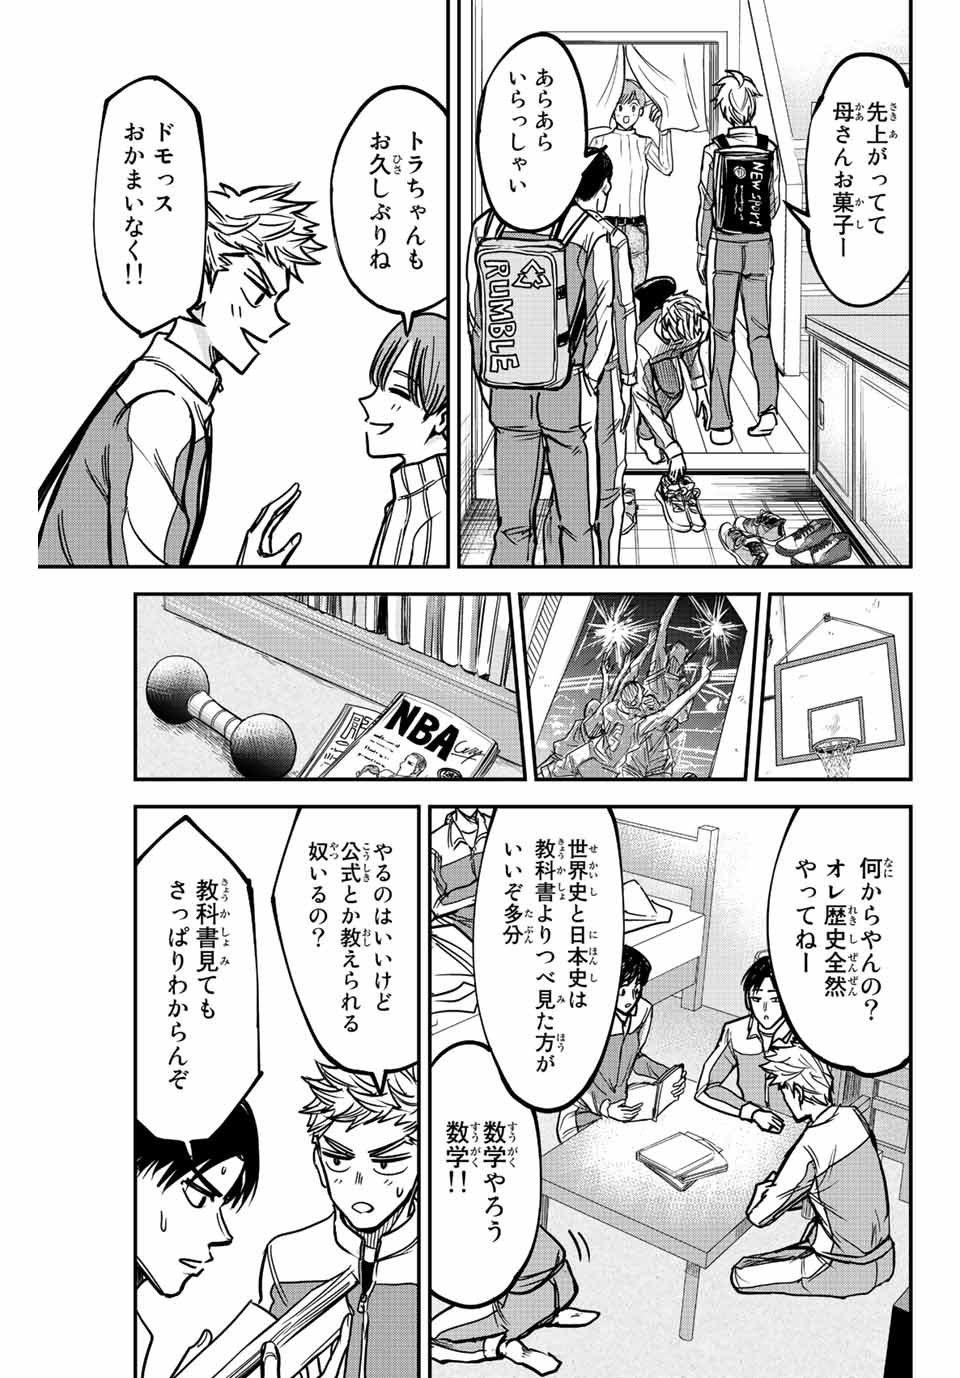 B＆ALIVE 第1.1話 - Page 7